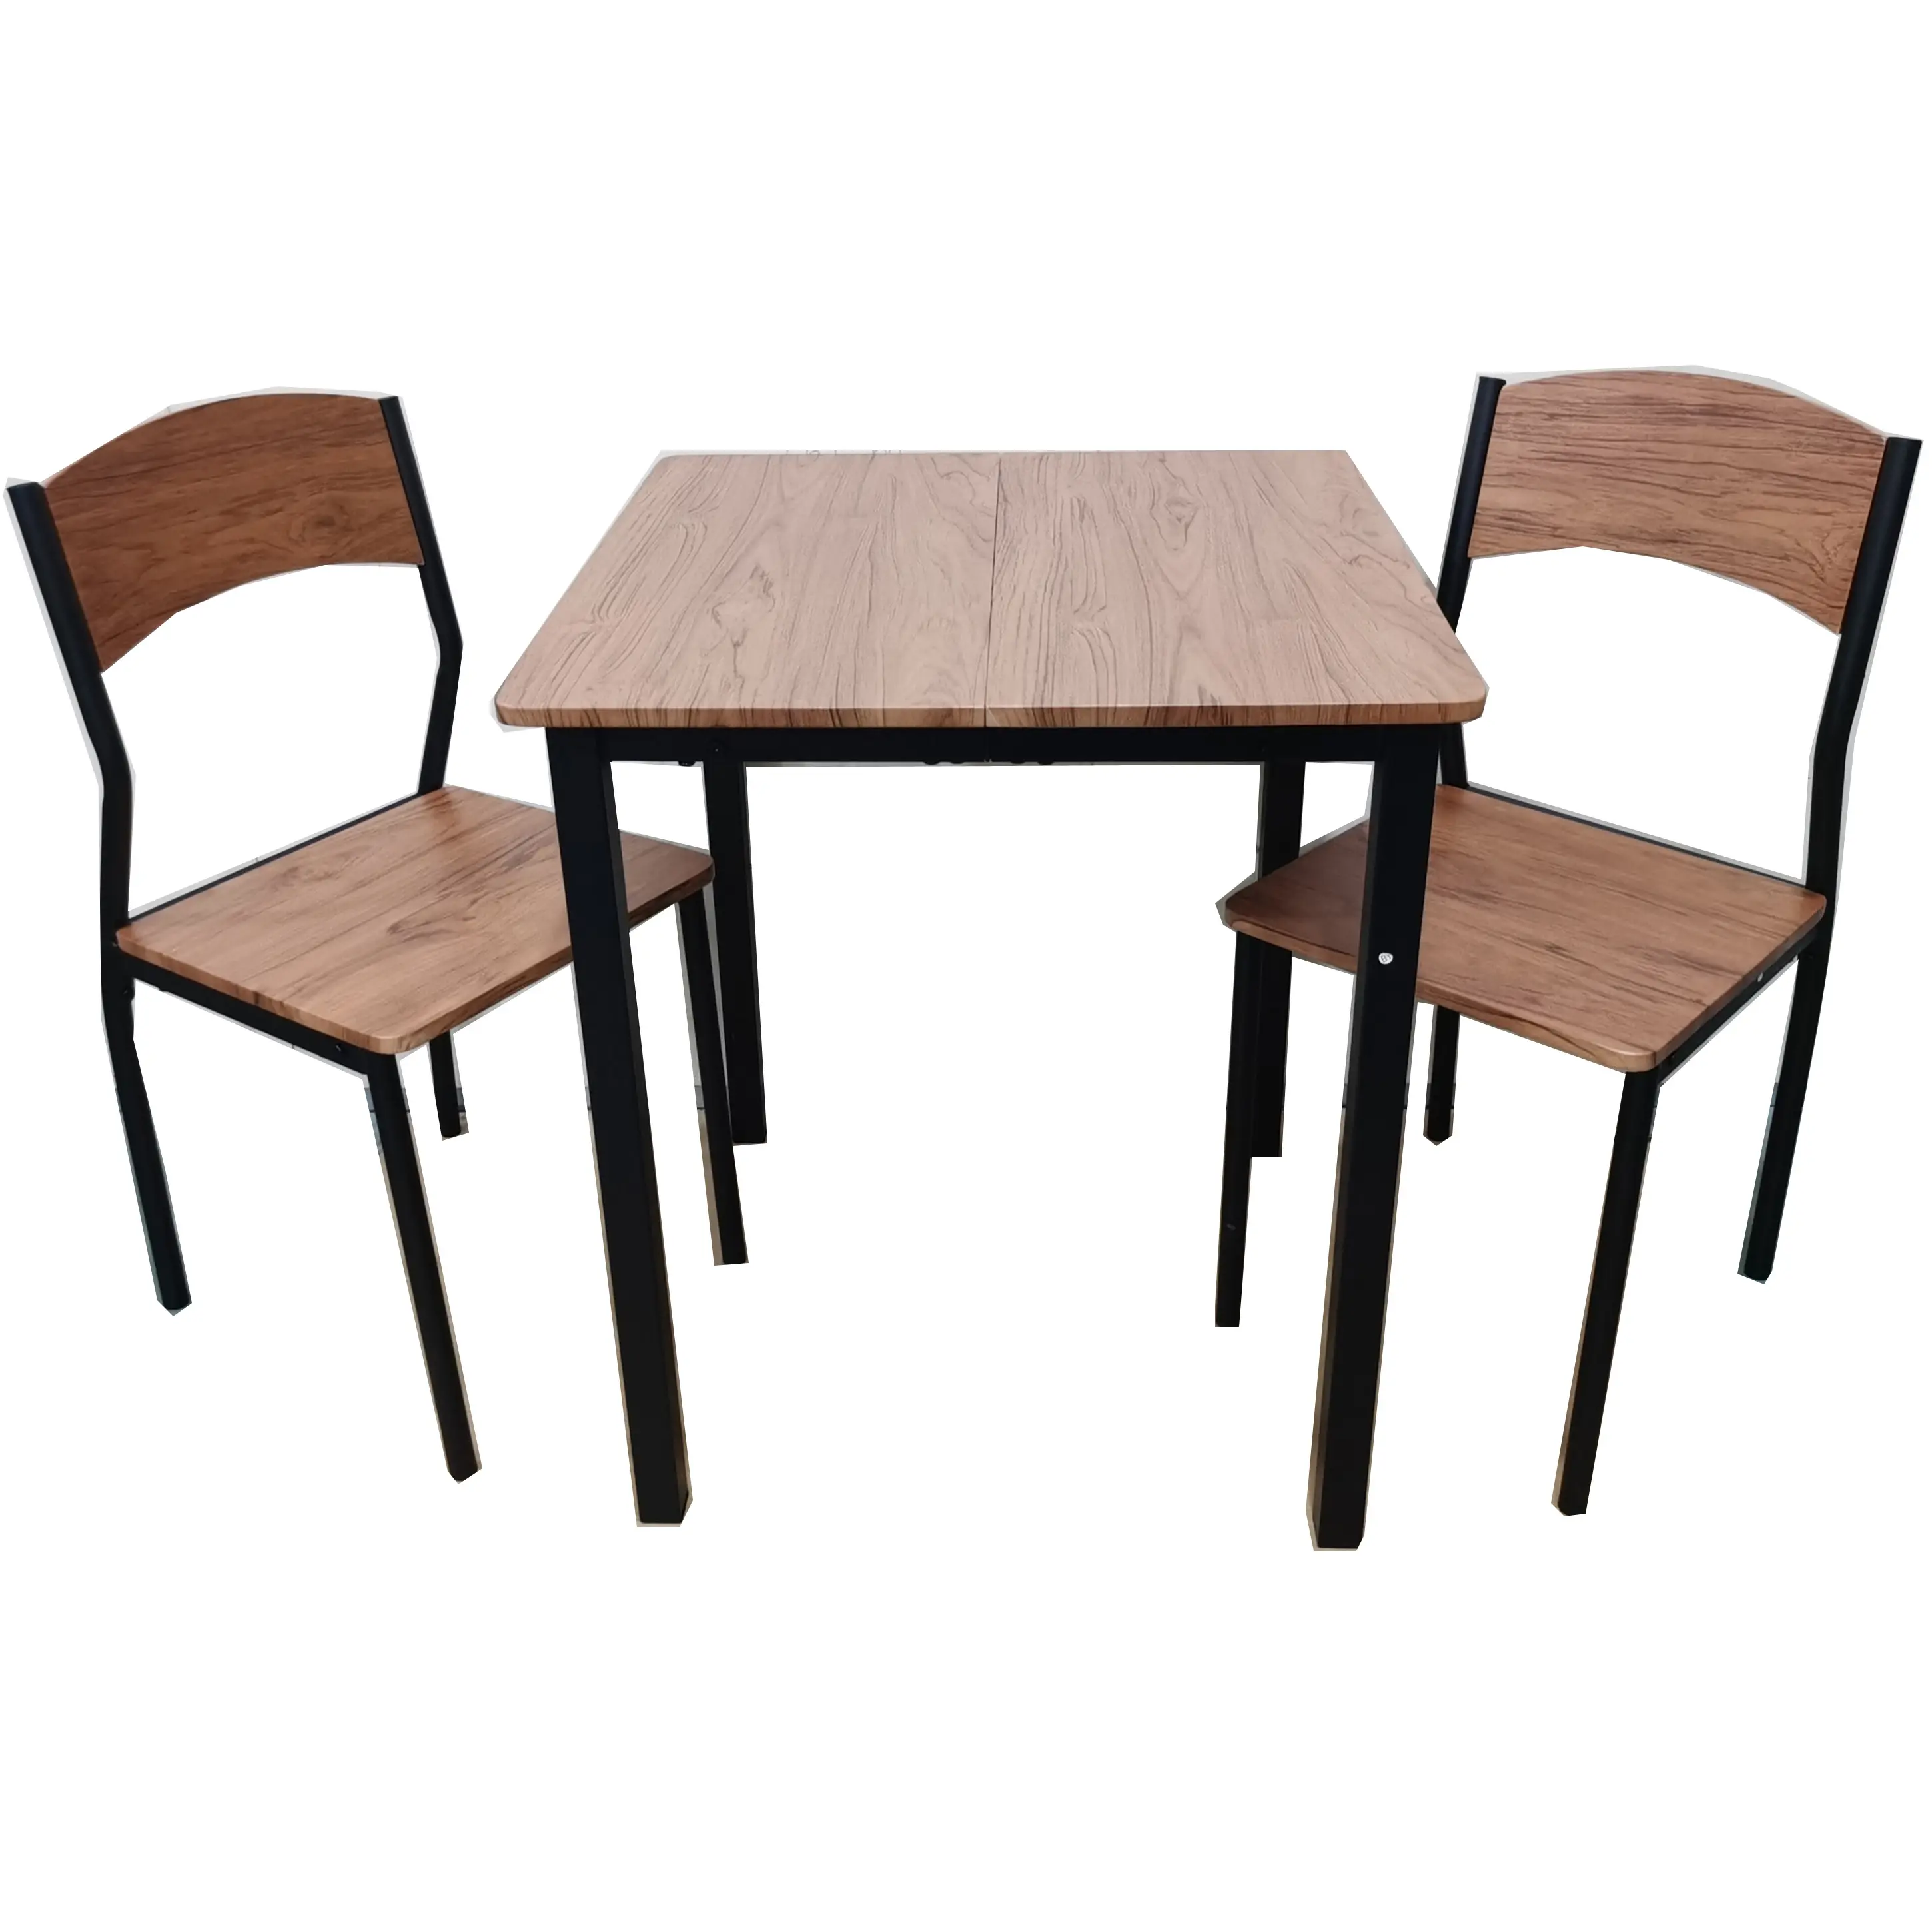 Wood dinning Table set 3 pcs table with Metal Frame 2 seater dinning table set furniture for dining room Catering shops